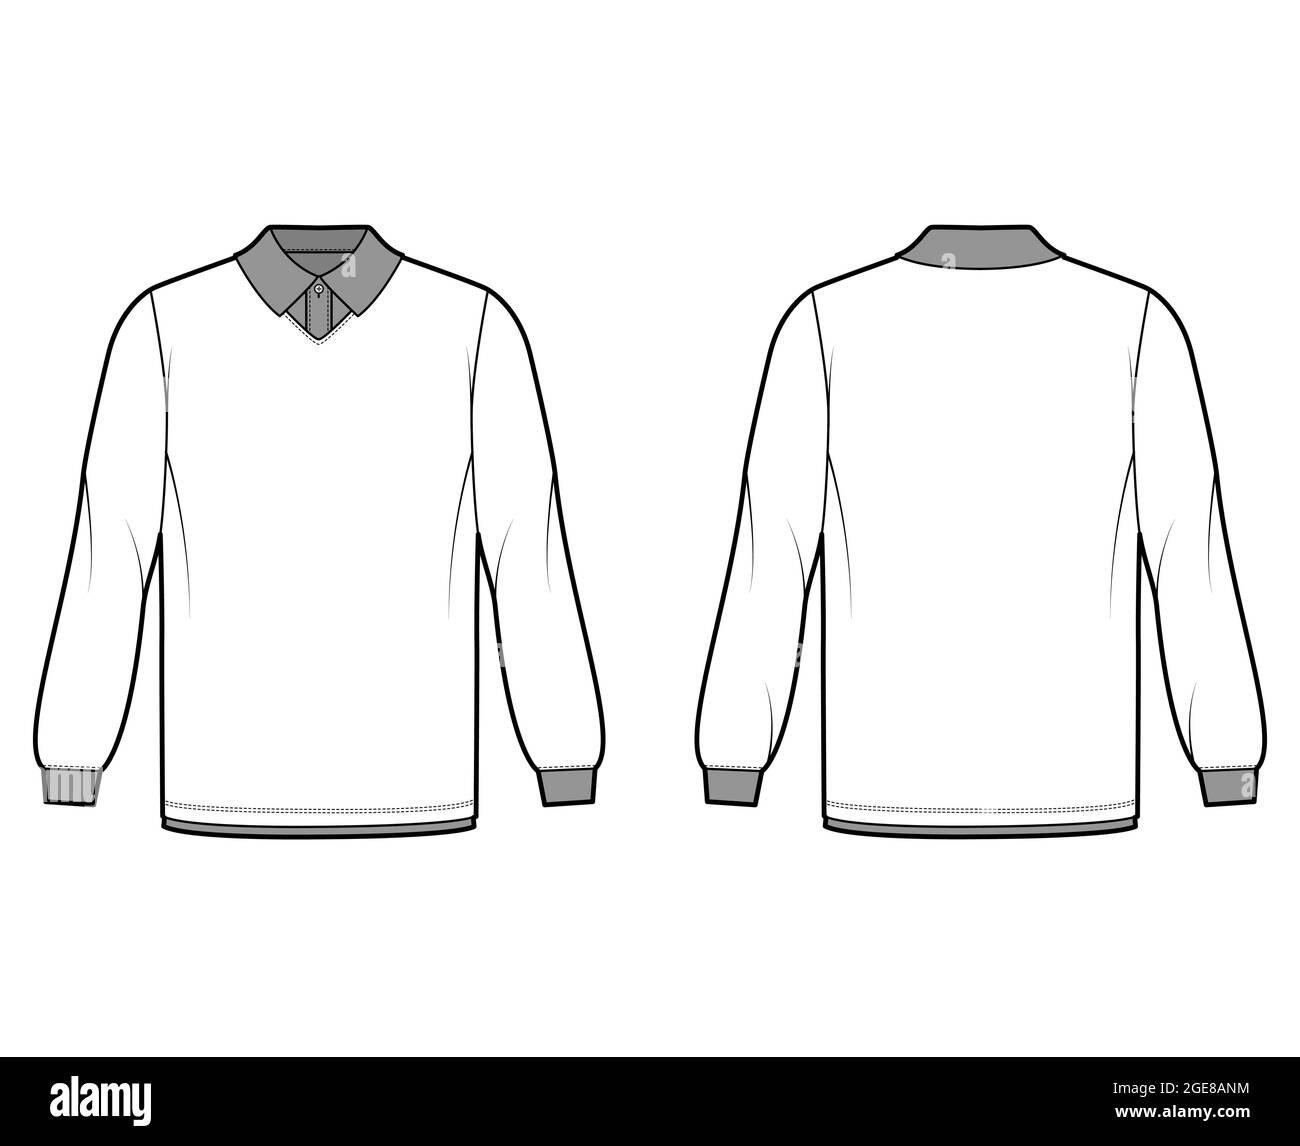 Shirt double technical fashion illustration with long sleeves, tunic length, henley neck, oversized, flat classic collar. Apparel top outwear template front, back, white color. Women men CAD mockup Stock Vector